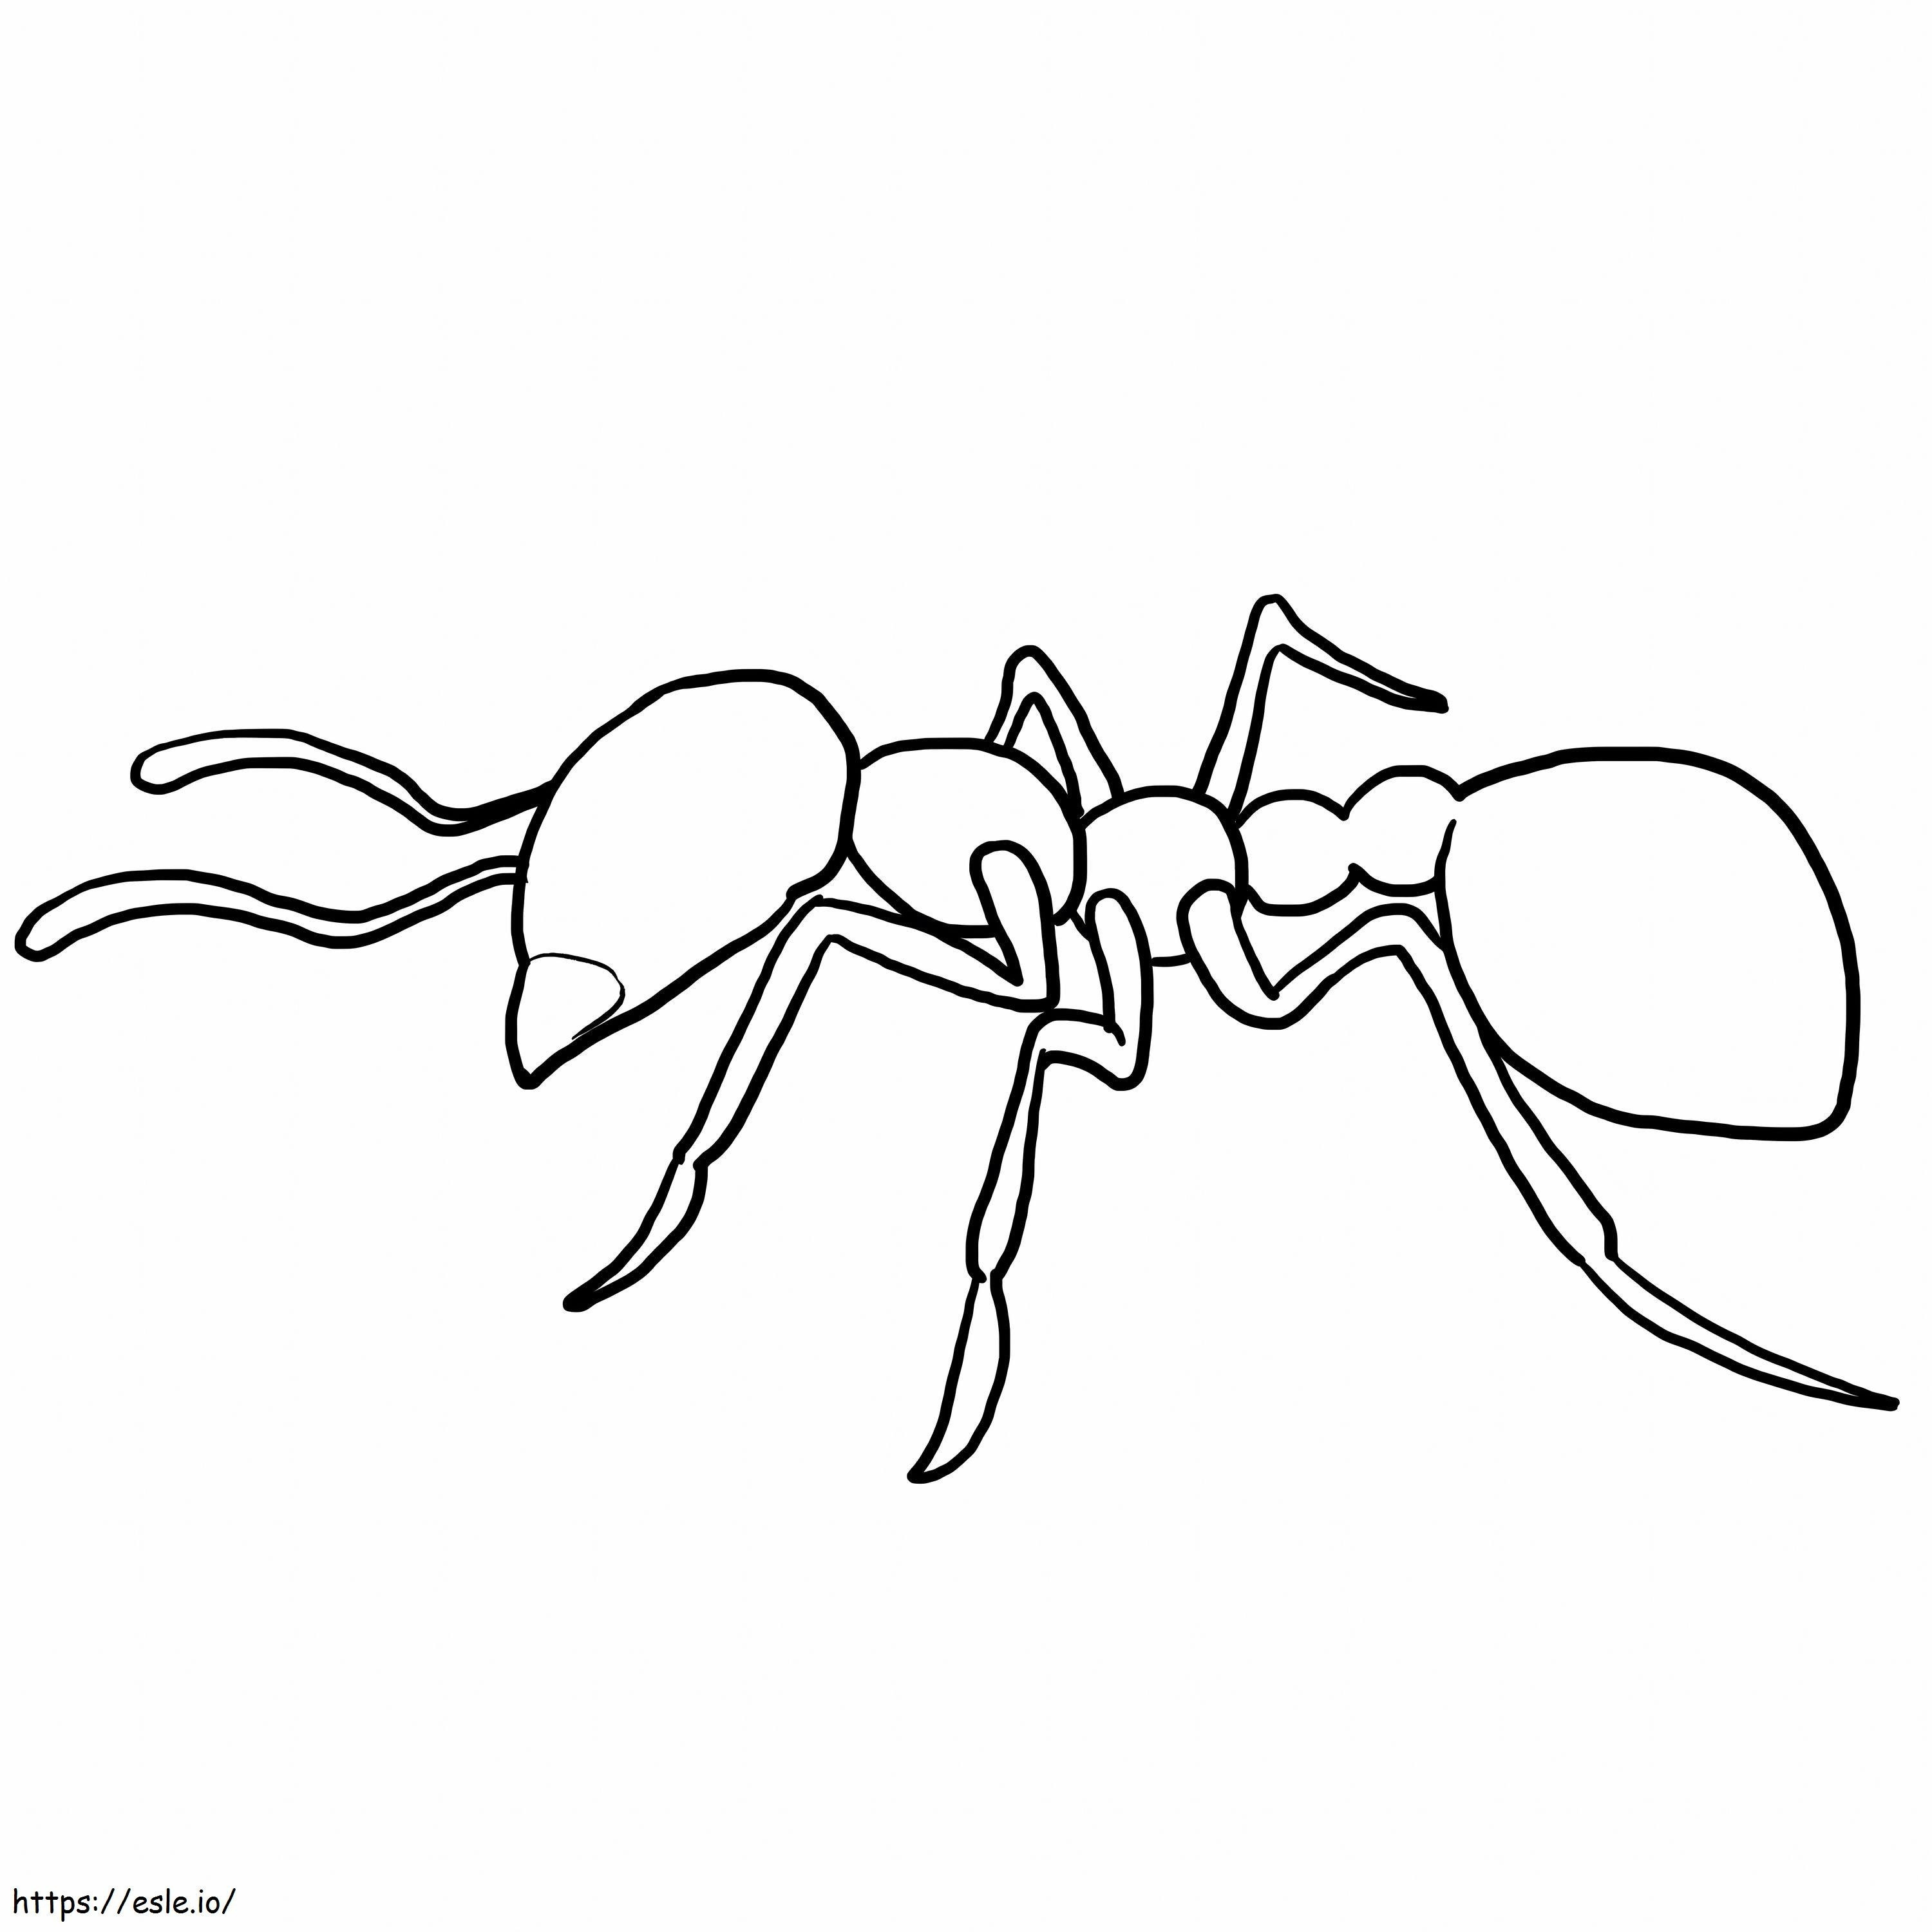 Ant Outline coloring page